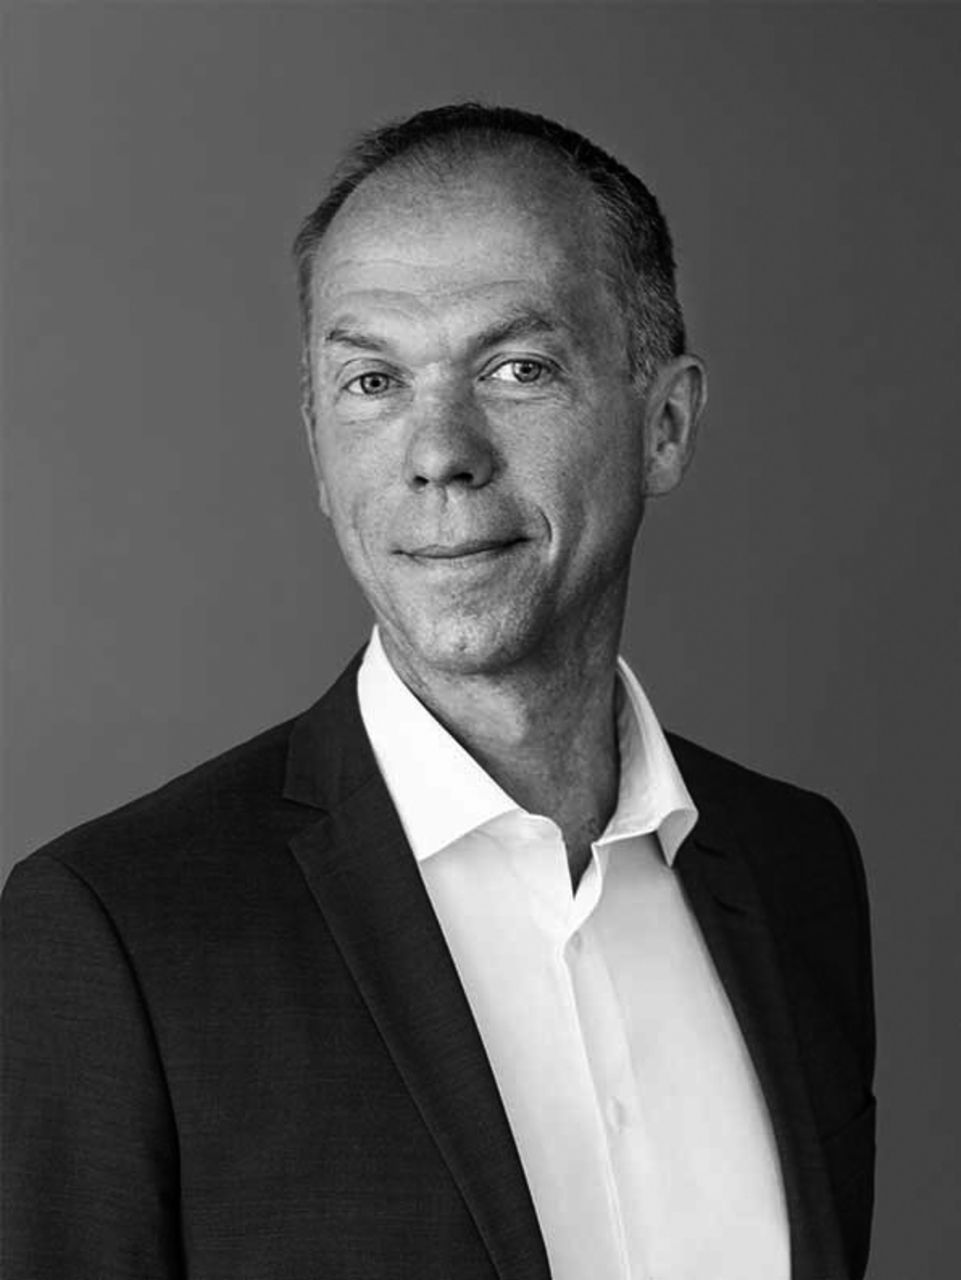 black and white portrait of Mathias Carlbaum, Member of the Executive Board of TRATON SE, Chief Executive Officer and President of Navistar International Corporation 